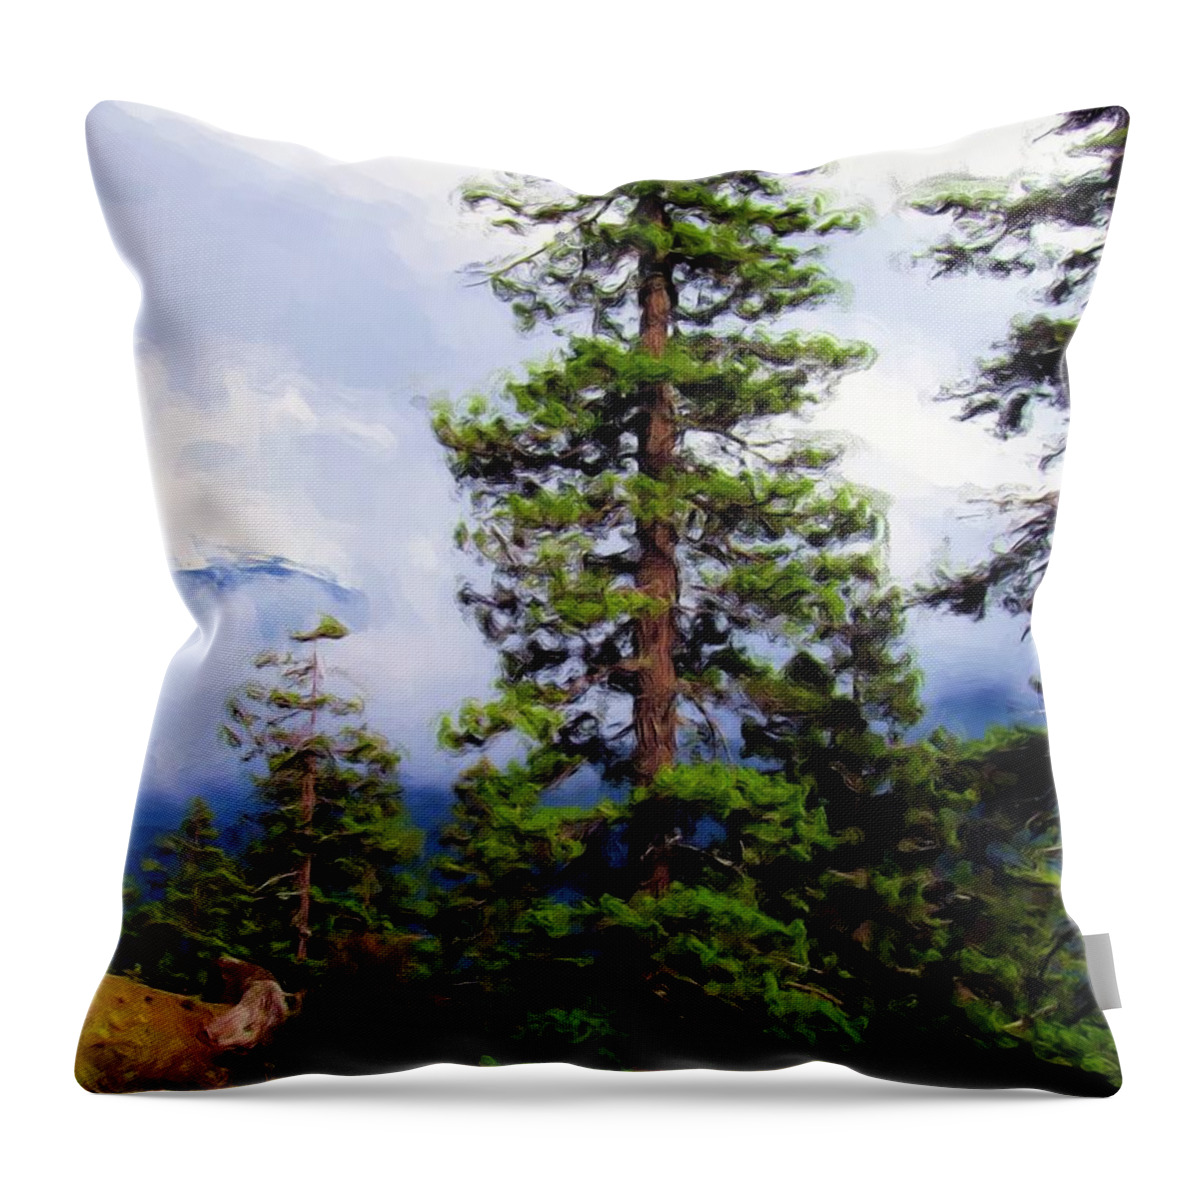 Pacific Northwest Throw Pillow featuring the painting Pacific Northwest by Jenny Hudson